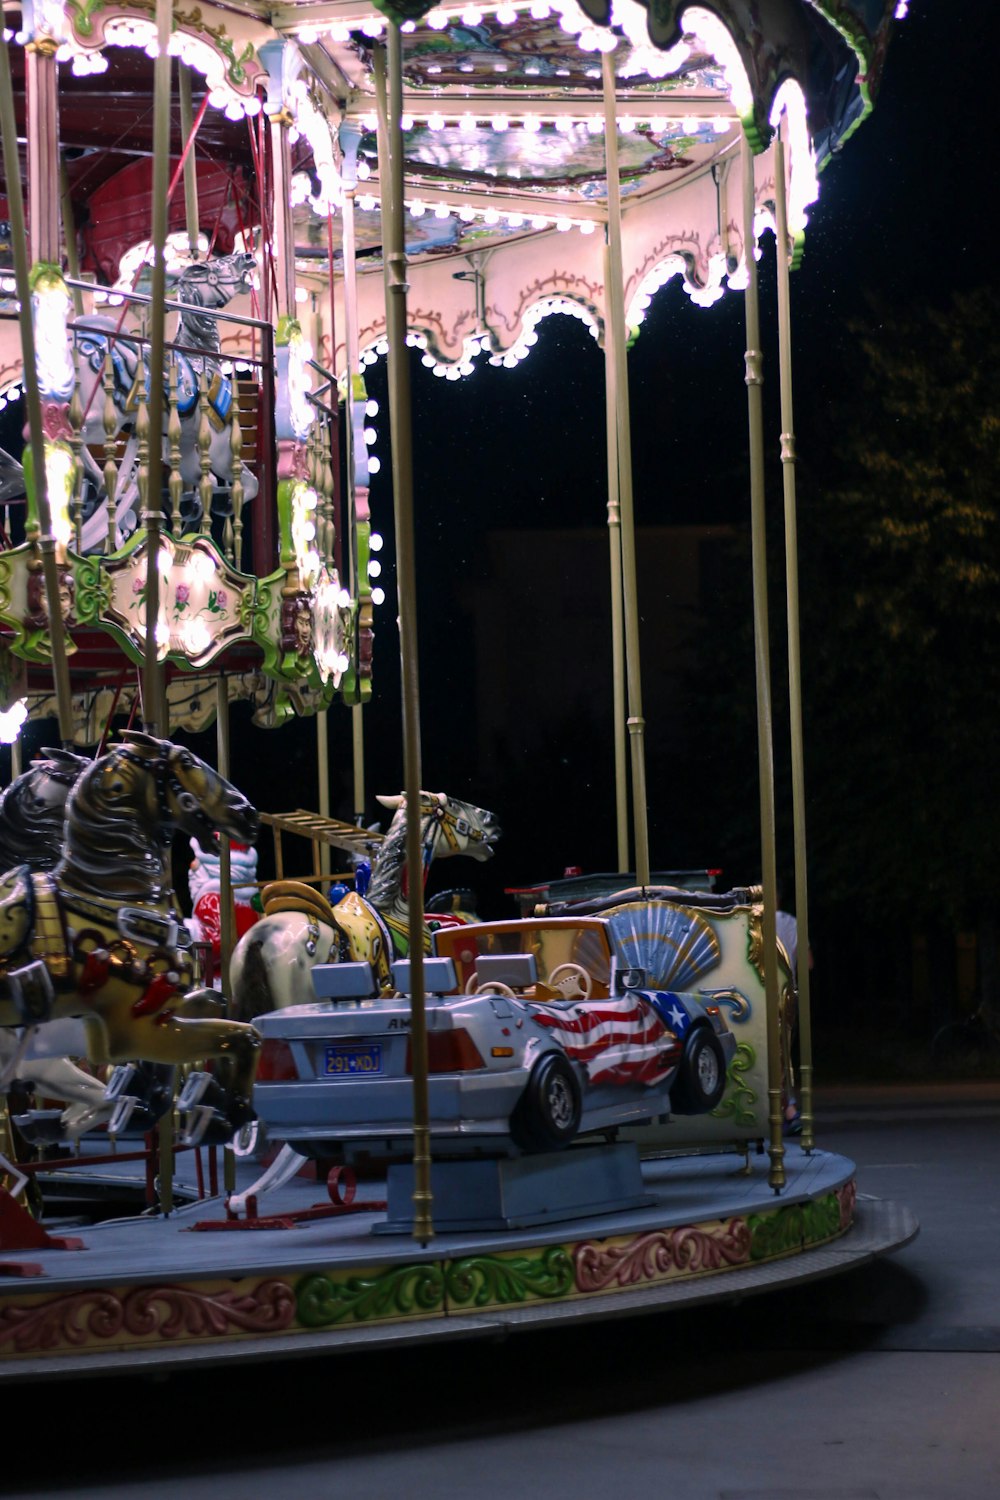 a merry go round at night with lights on